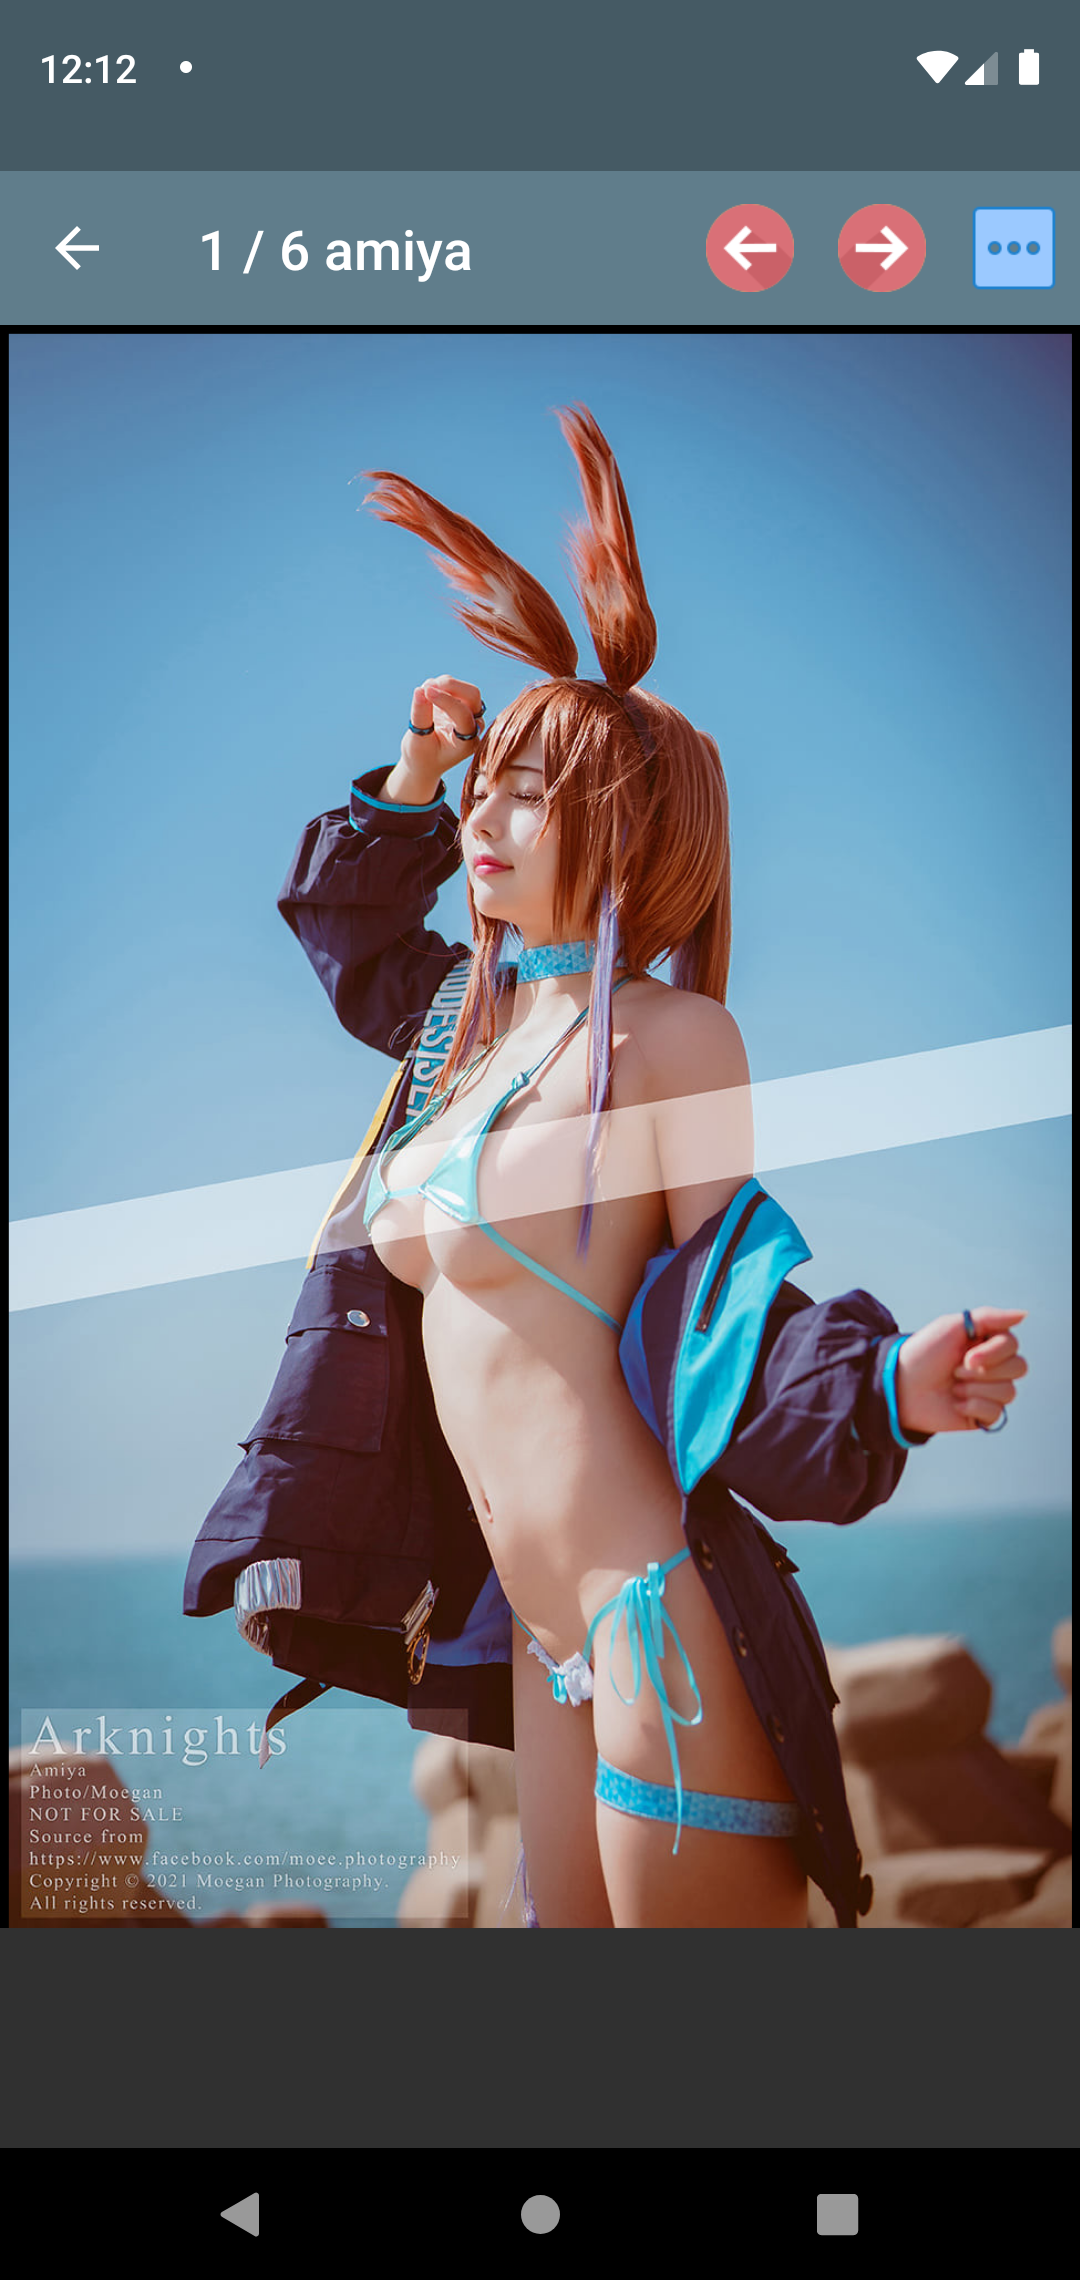 Okita Rinka Pictues gag,asian,adams,photos,hentai,mobile,app,apps,best,sissy,stacy,aplikasi,softcore,erotic,android,apk,pictures,wallpaper,pic,anime,adult,cosplay,with